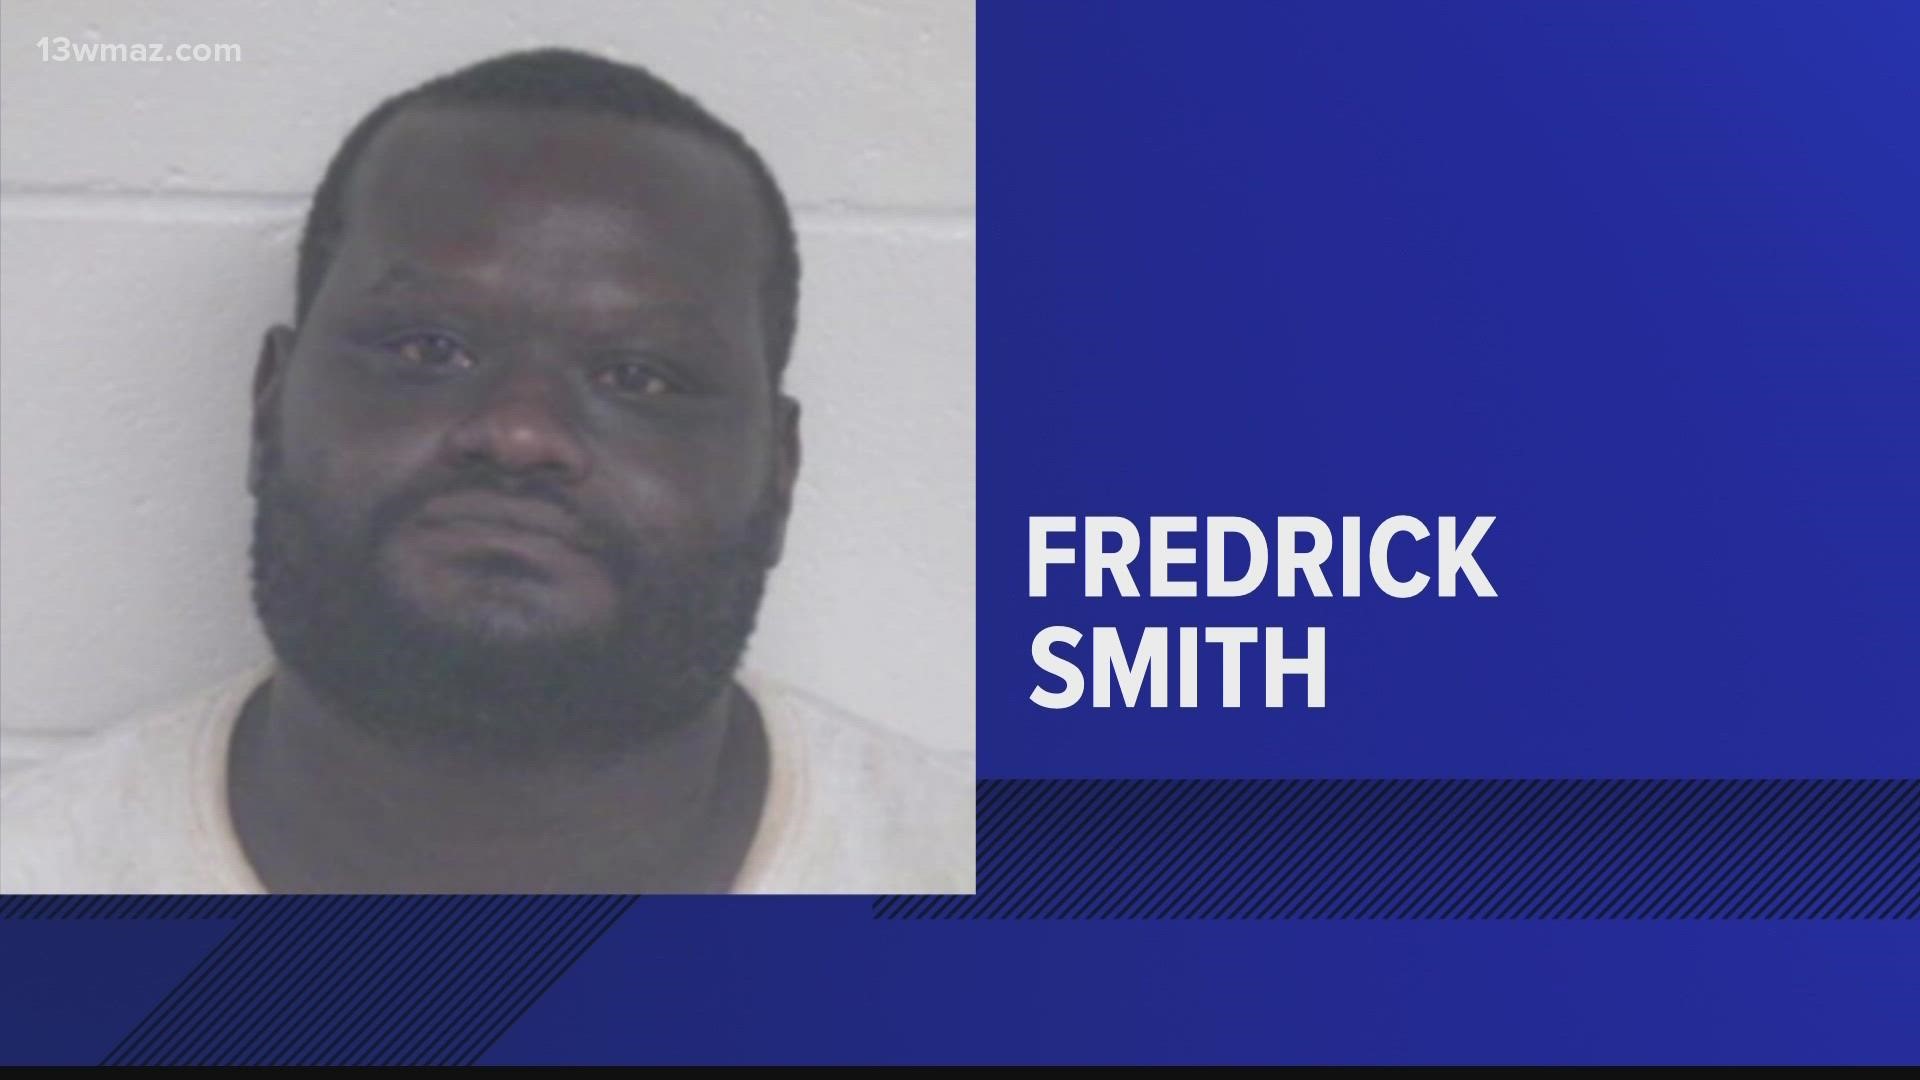 Fredrick Leartist Smith, 35, of Wrightsville, has been charged with Aggravated Assault and Reckless Conduct.